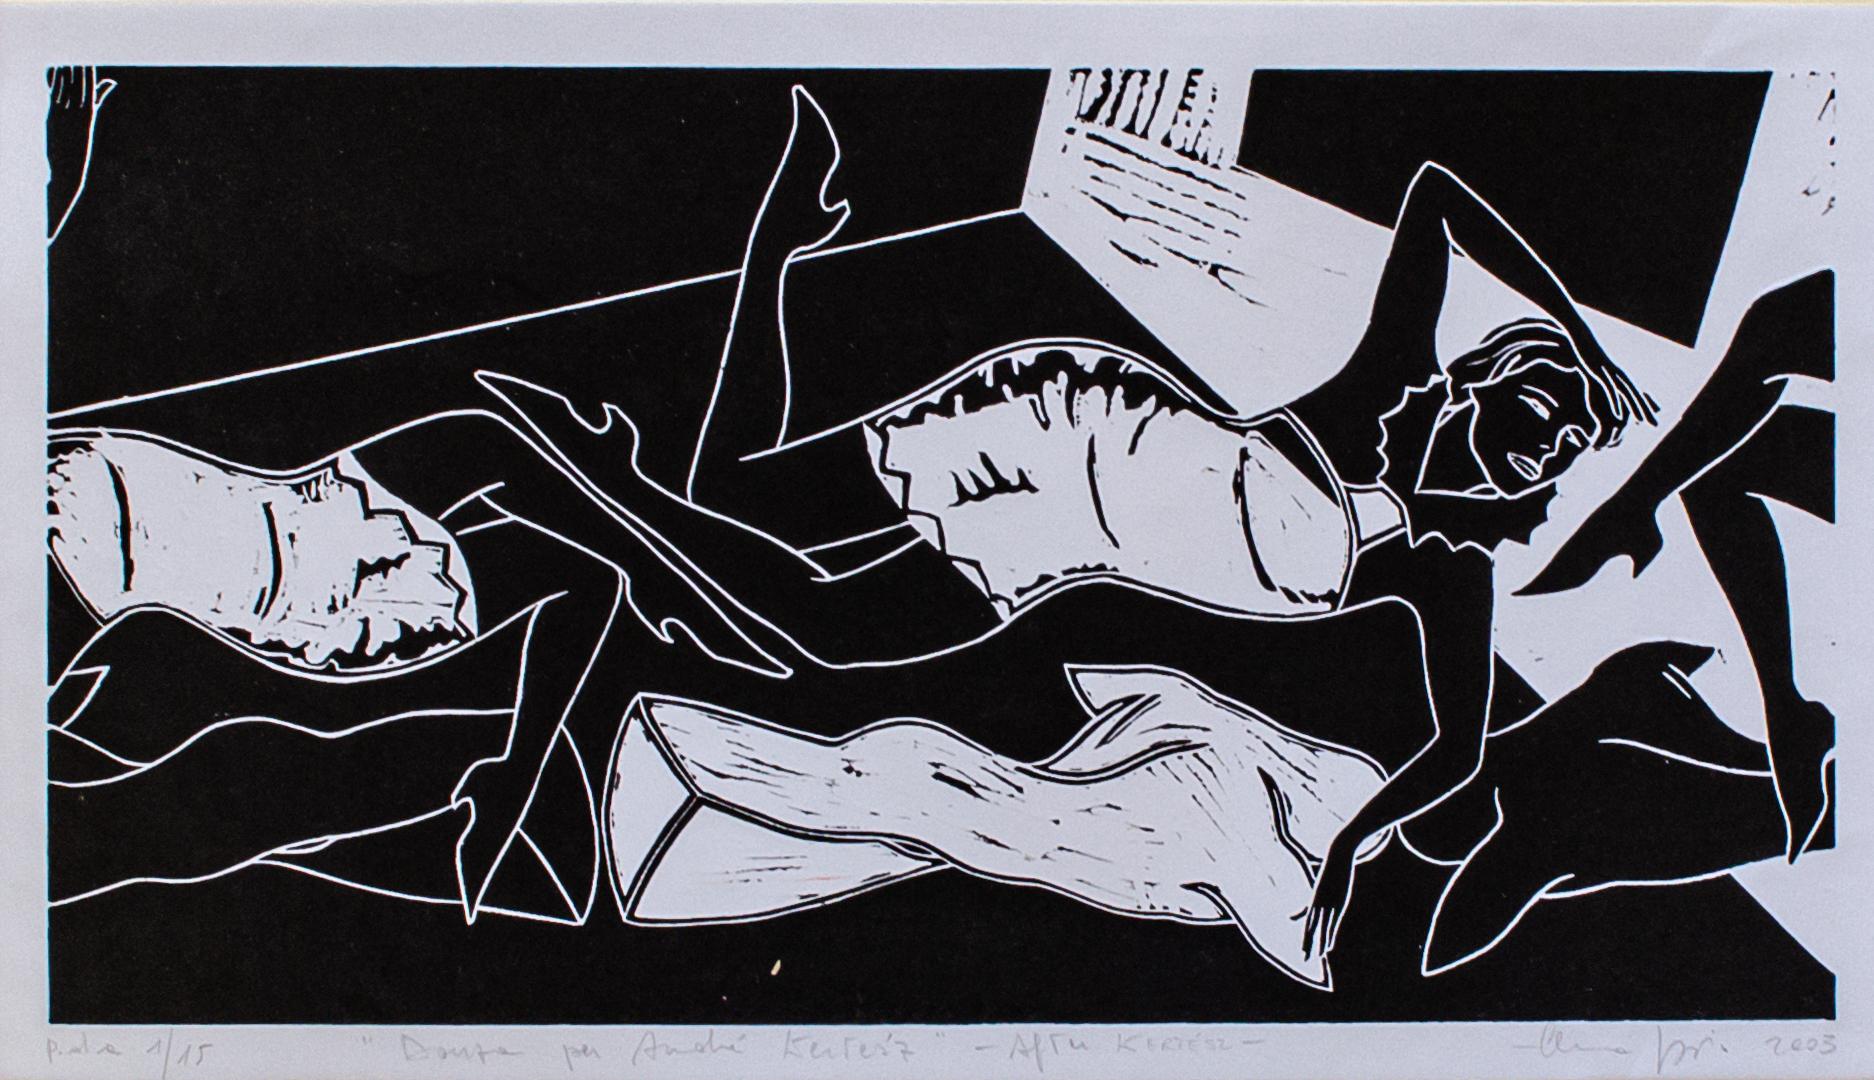 Elena Greggio (Italian, b. 1973)
Danza Per André Kertész (After Kertész), 2003
Etching
9 x 12 in.
Mat: 14 x 20 in.
Edition 1 of 15
Signed, dated and inscribed bottom: Danza Per André Kertész, After André Kertész, Elena Greggio, 2003
Signed and